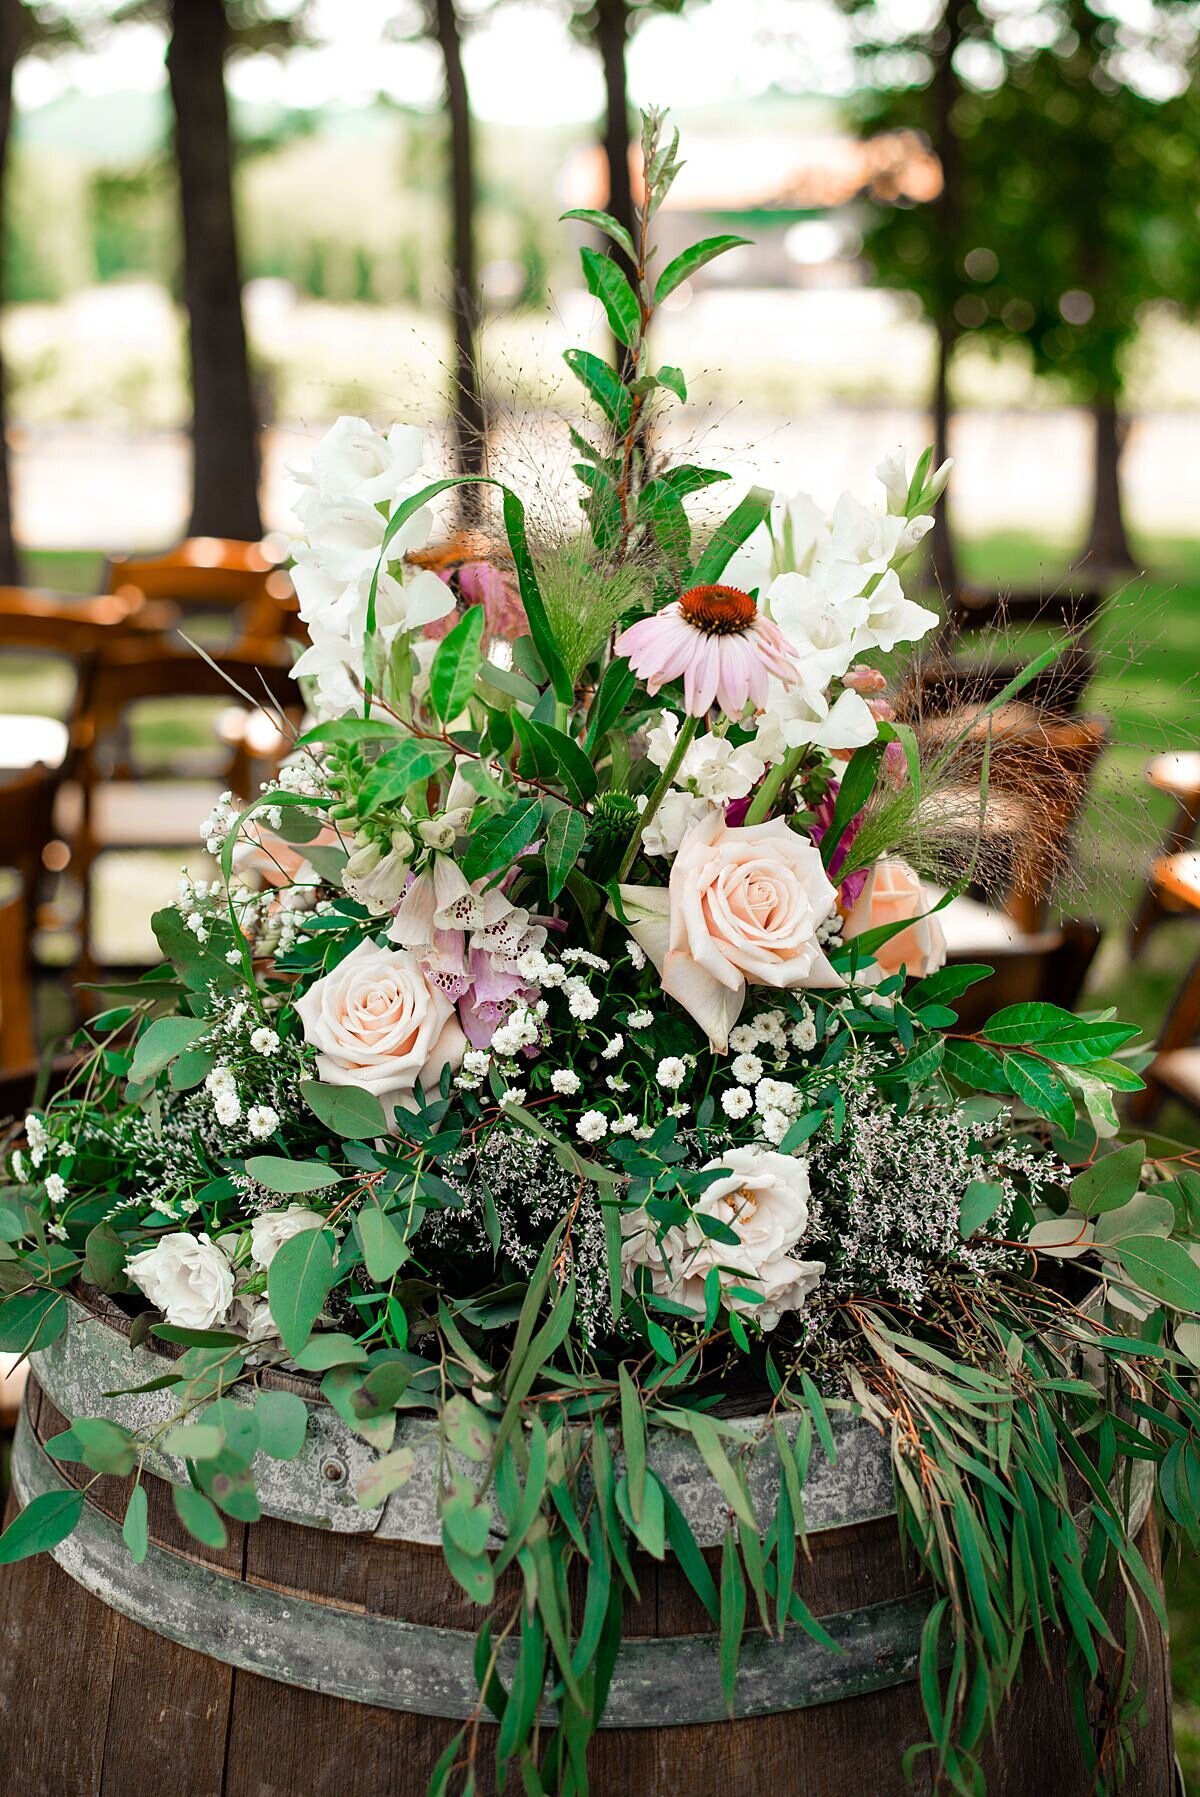 Sitting on top of a wine barrel a large cascading floral arrangement of assorted greenery with pink roses, pink hyacinth, pink carnations, pink cosmos and baby's breath at Arrington Vineyards garden party